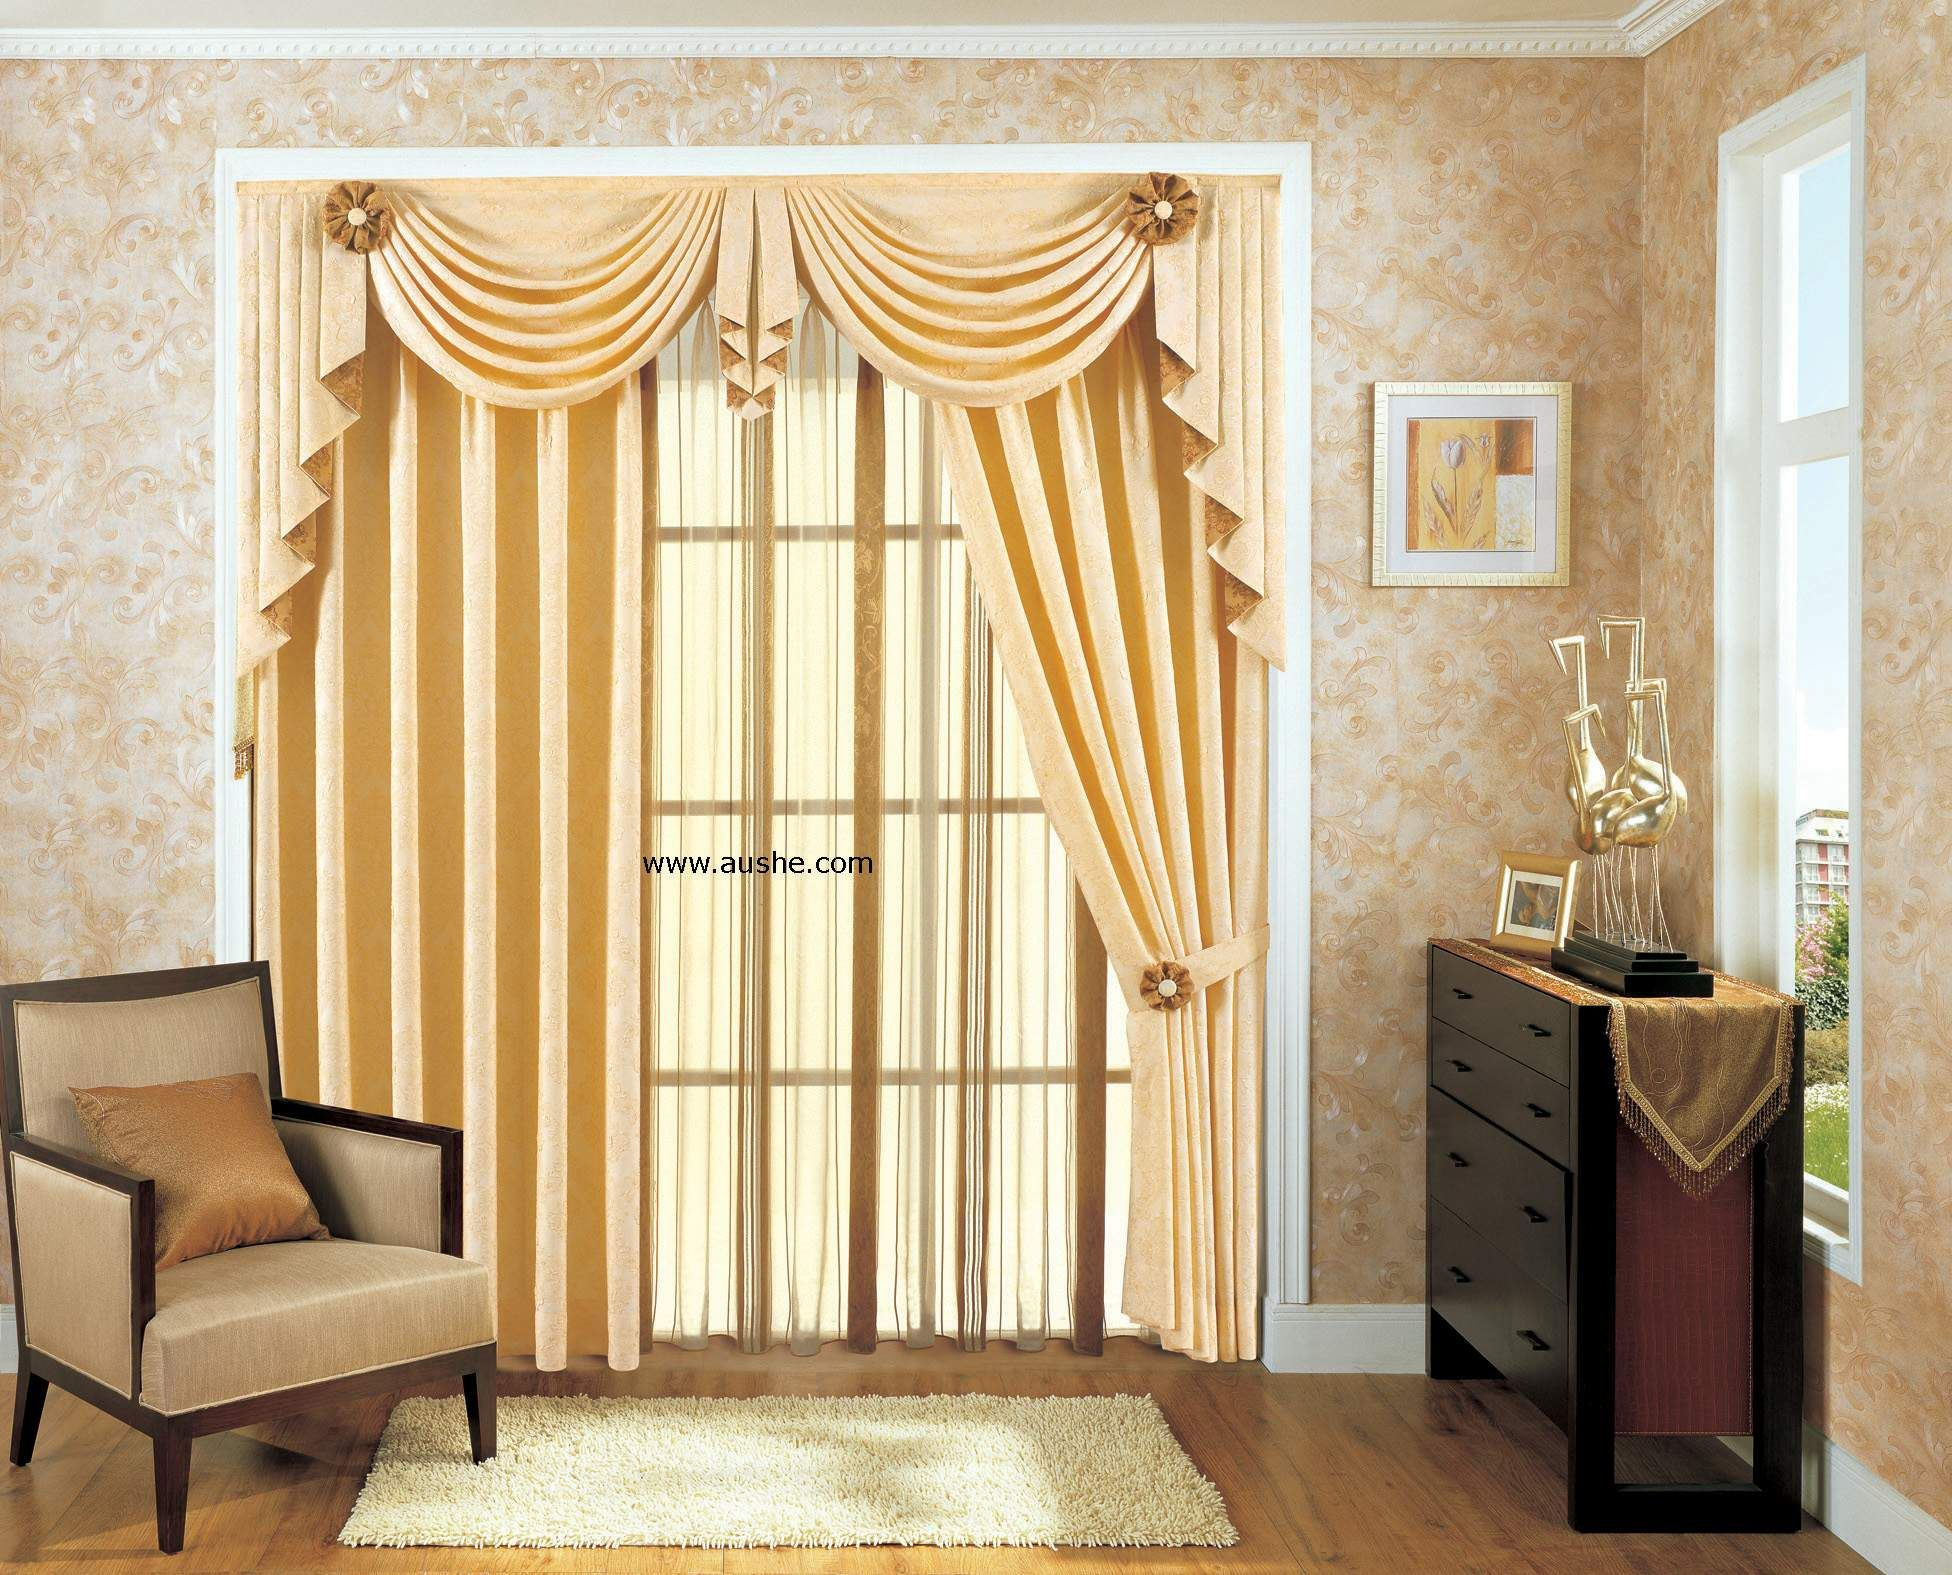 Elegant Curtains For Living Room
 Matching Wallpaper And Curtains For Living Room Homebase